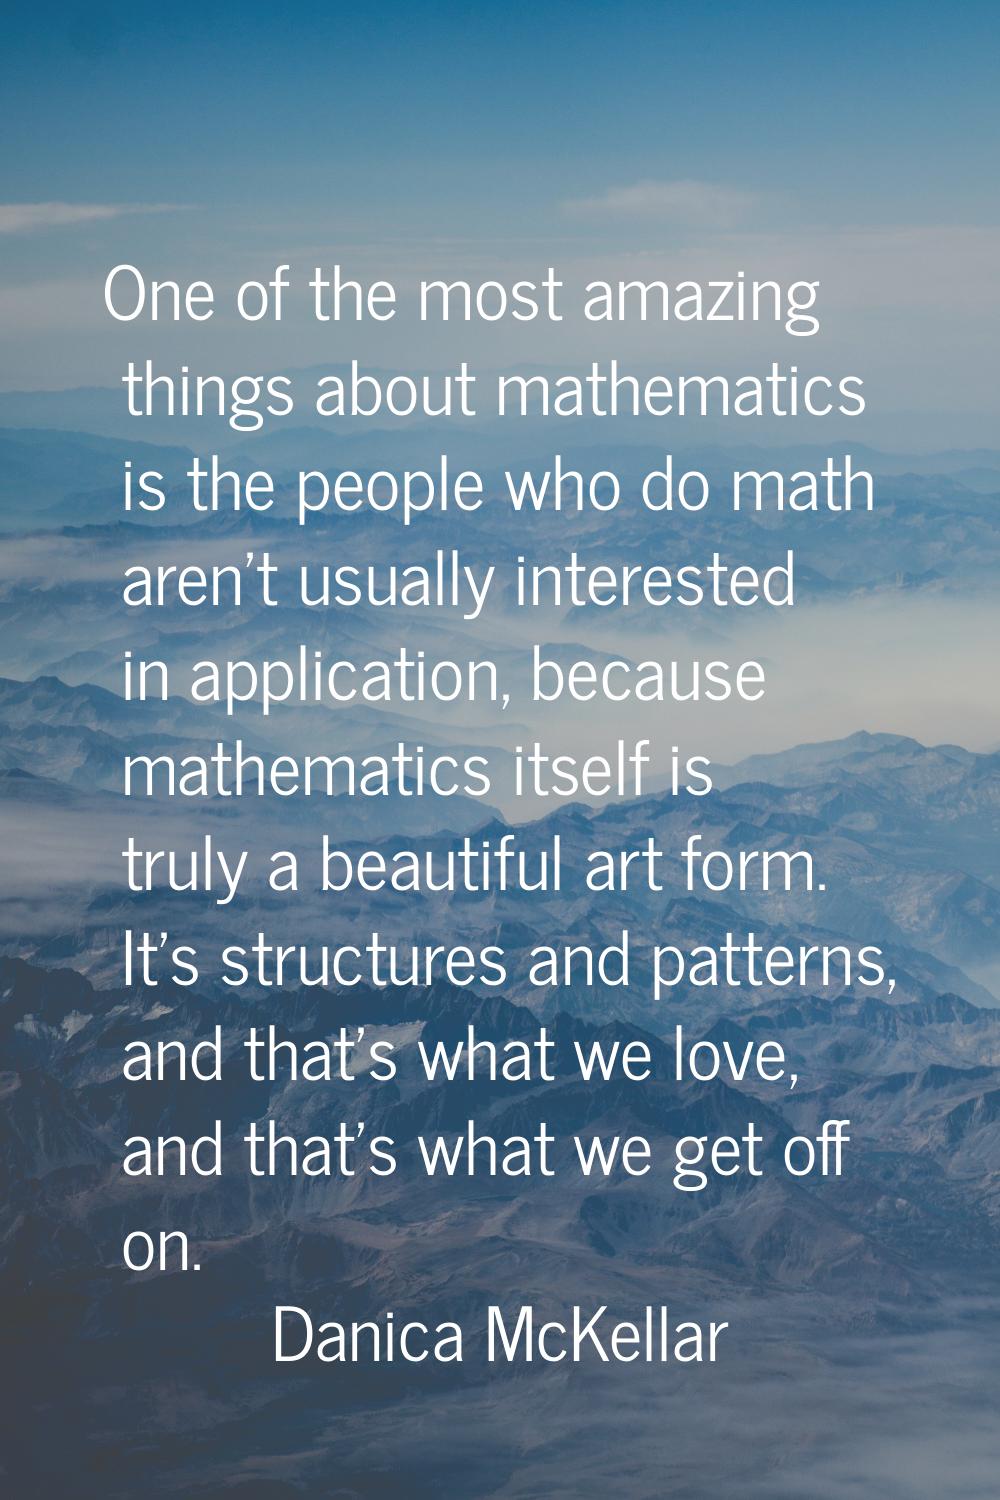 One of the most amazing things about mathematics is the people who do math aren't usually intereste